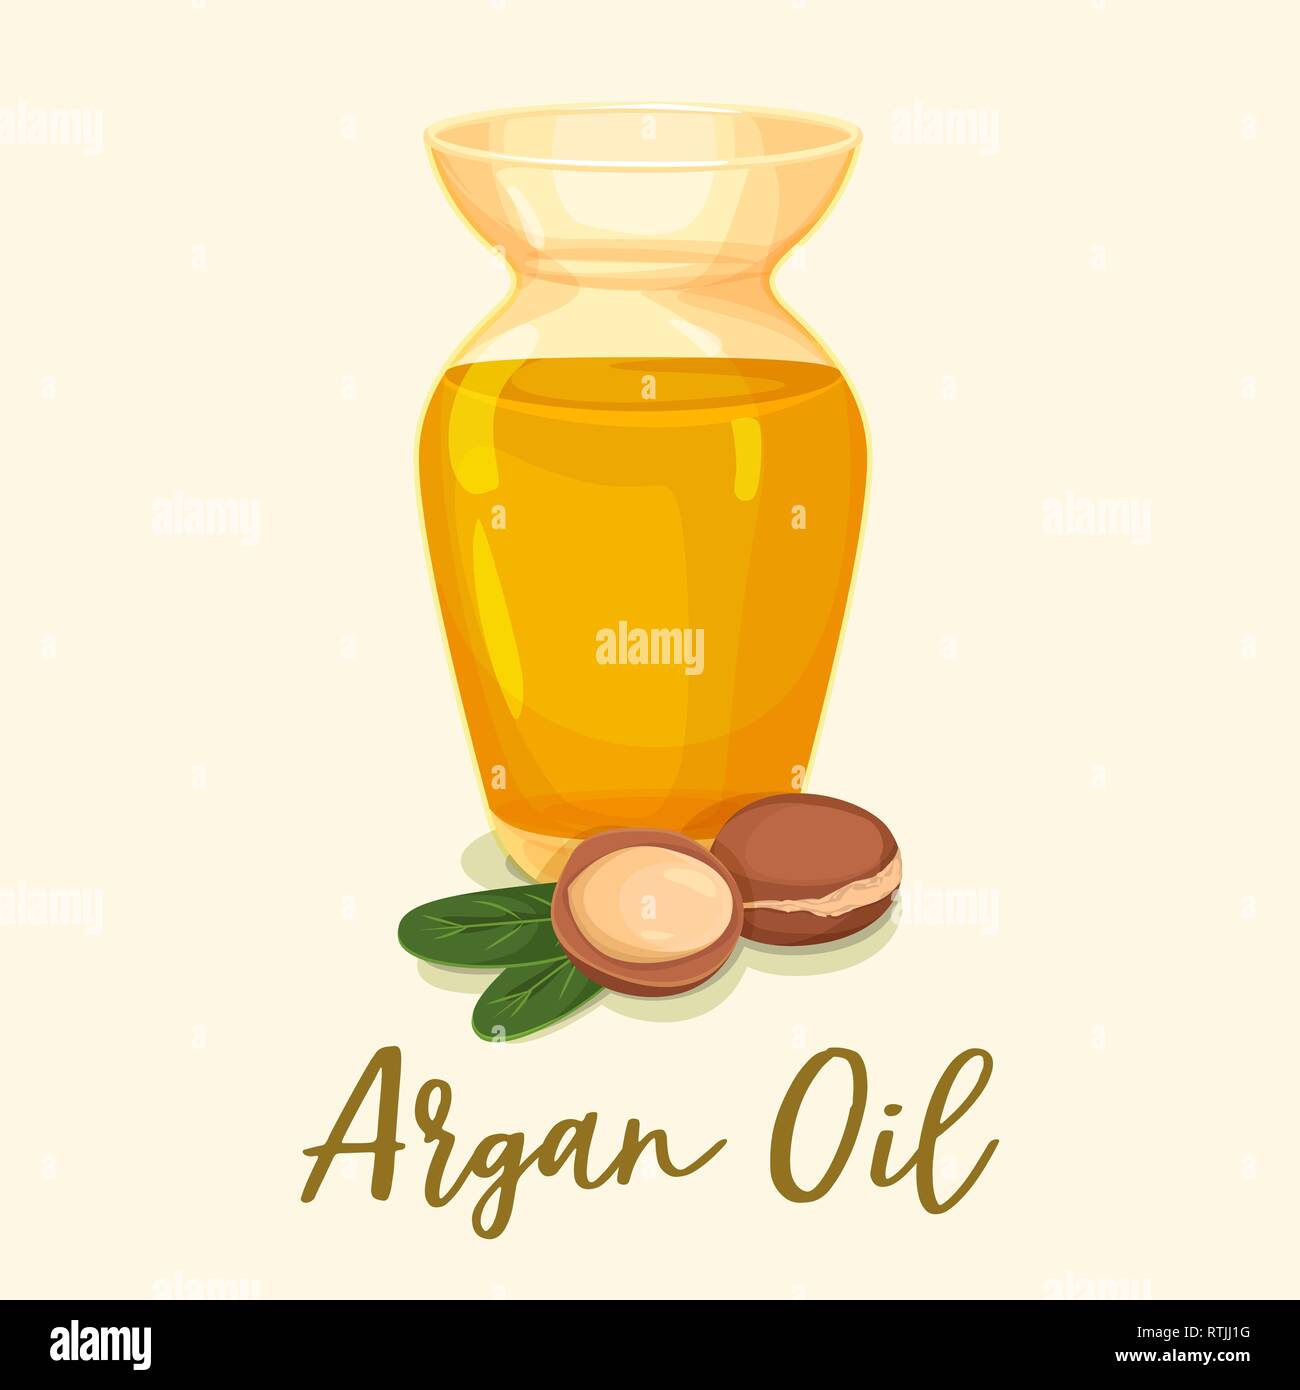 Download Argan Oil Bottle High Resolution Stock Photography And Images Alamy PSD Mockup Templates